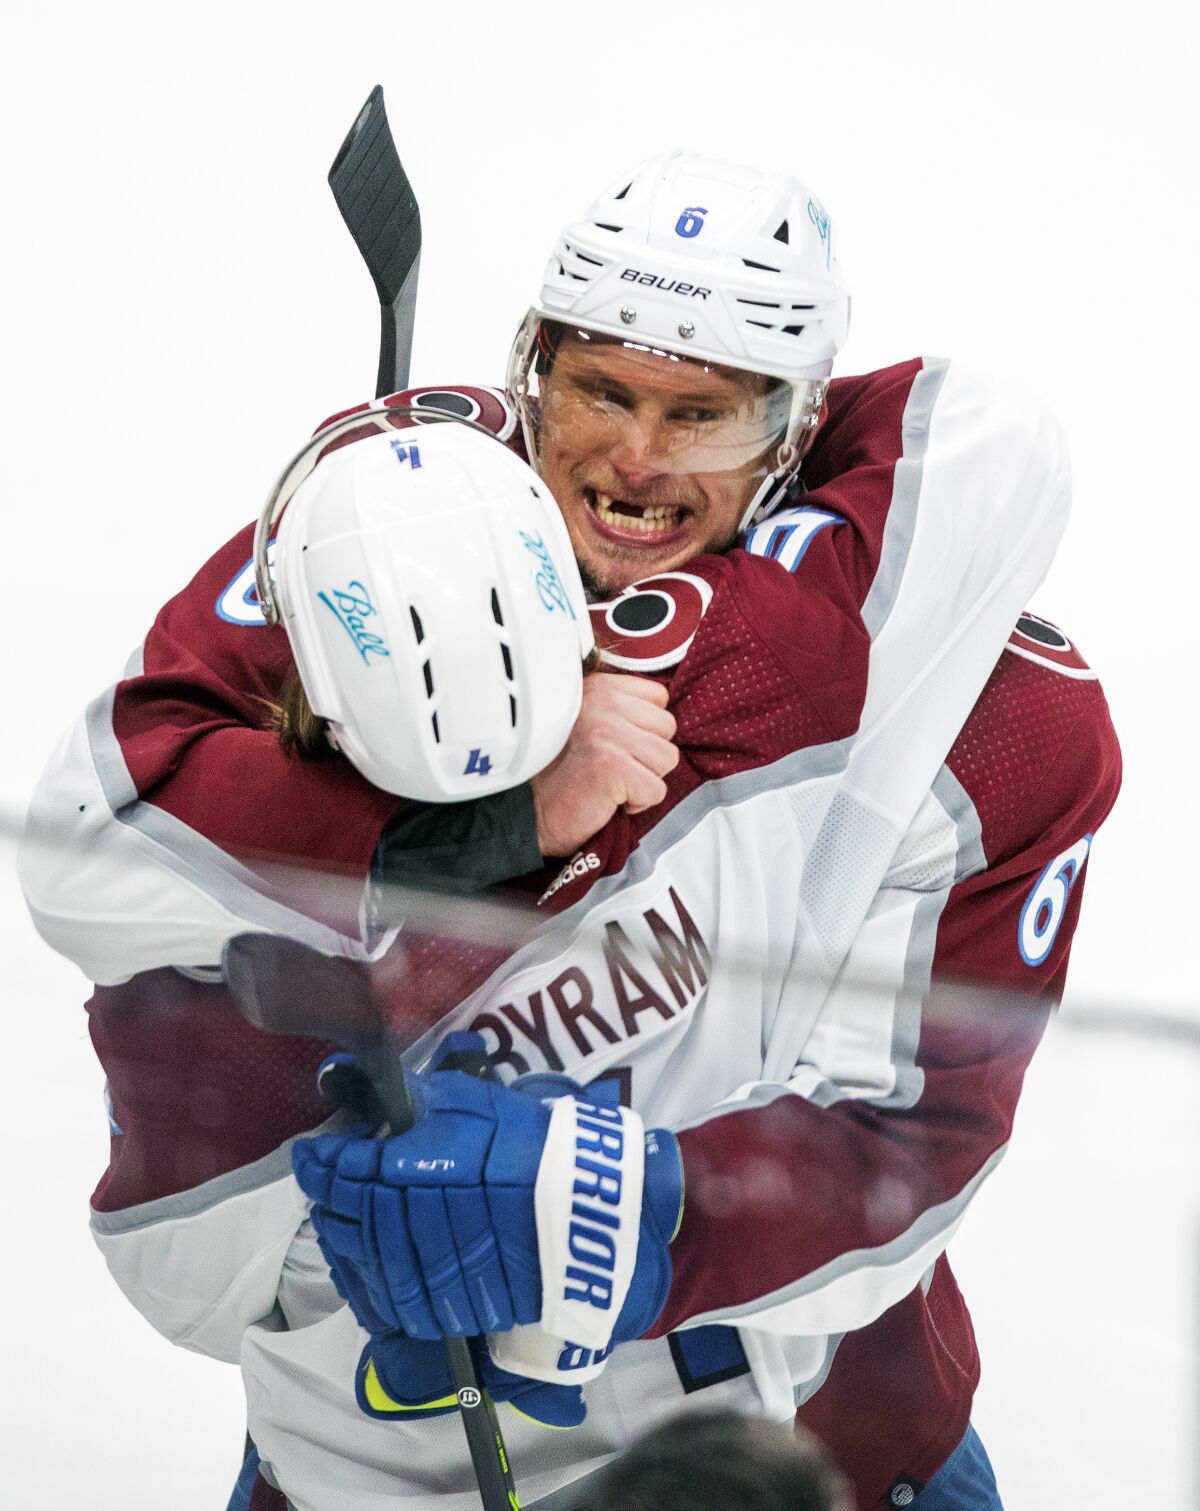 Colorado Avalanche's Erik Johnson (6) hugs Bowen Byram (4) after the team beat the Edmonton Oilers in overtime of NHL playoff hockey action in Edmonton, Alberta, Monday, June 6, 2022. The Avalanche won the game 6-5, to take the series. (Amber Bracken/The Canadian Press via AP)